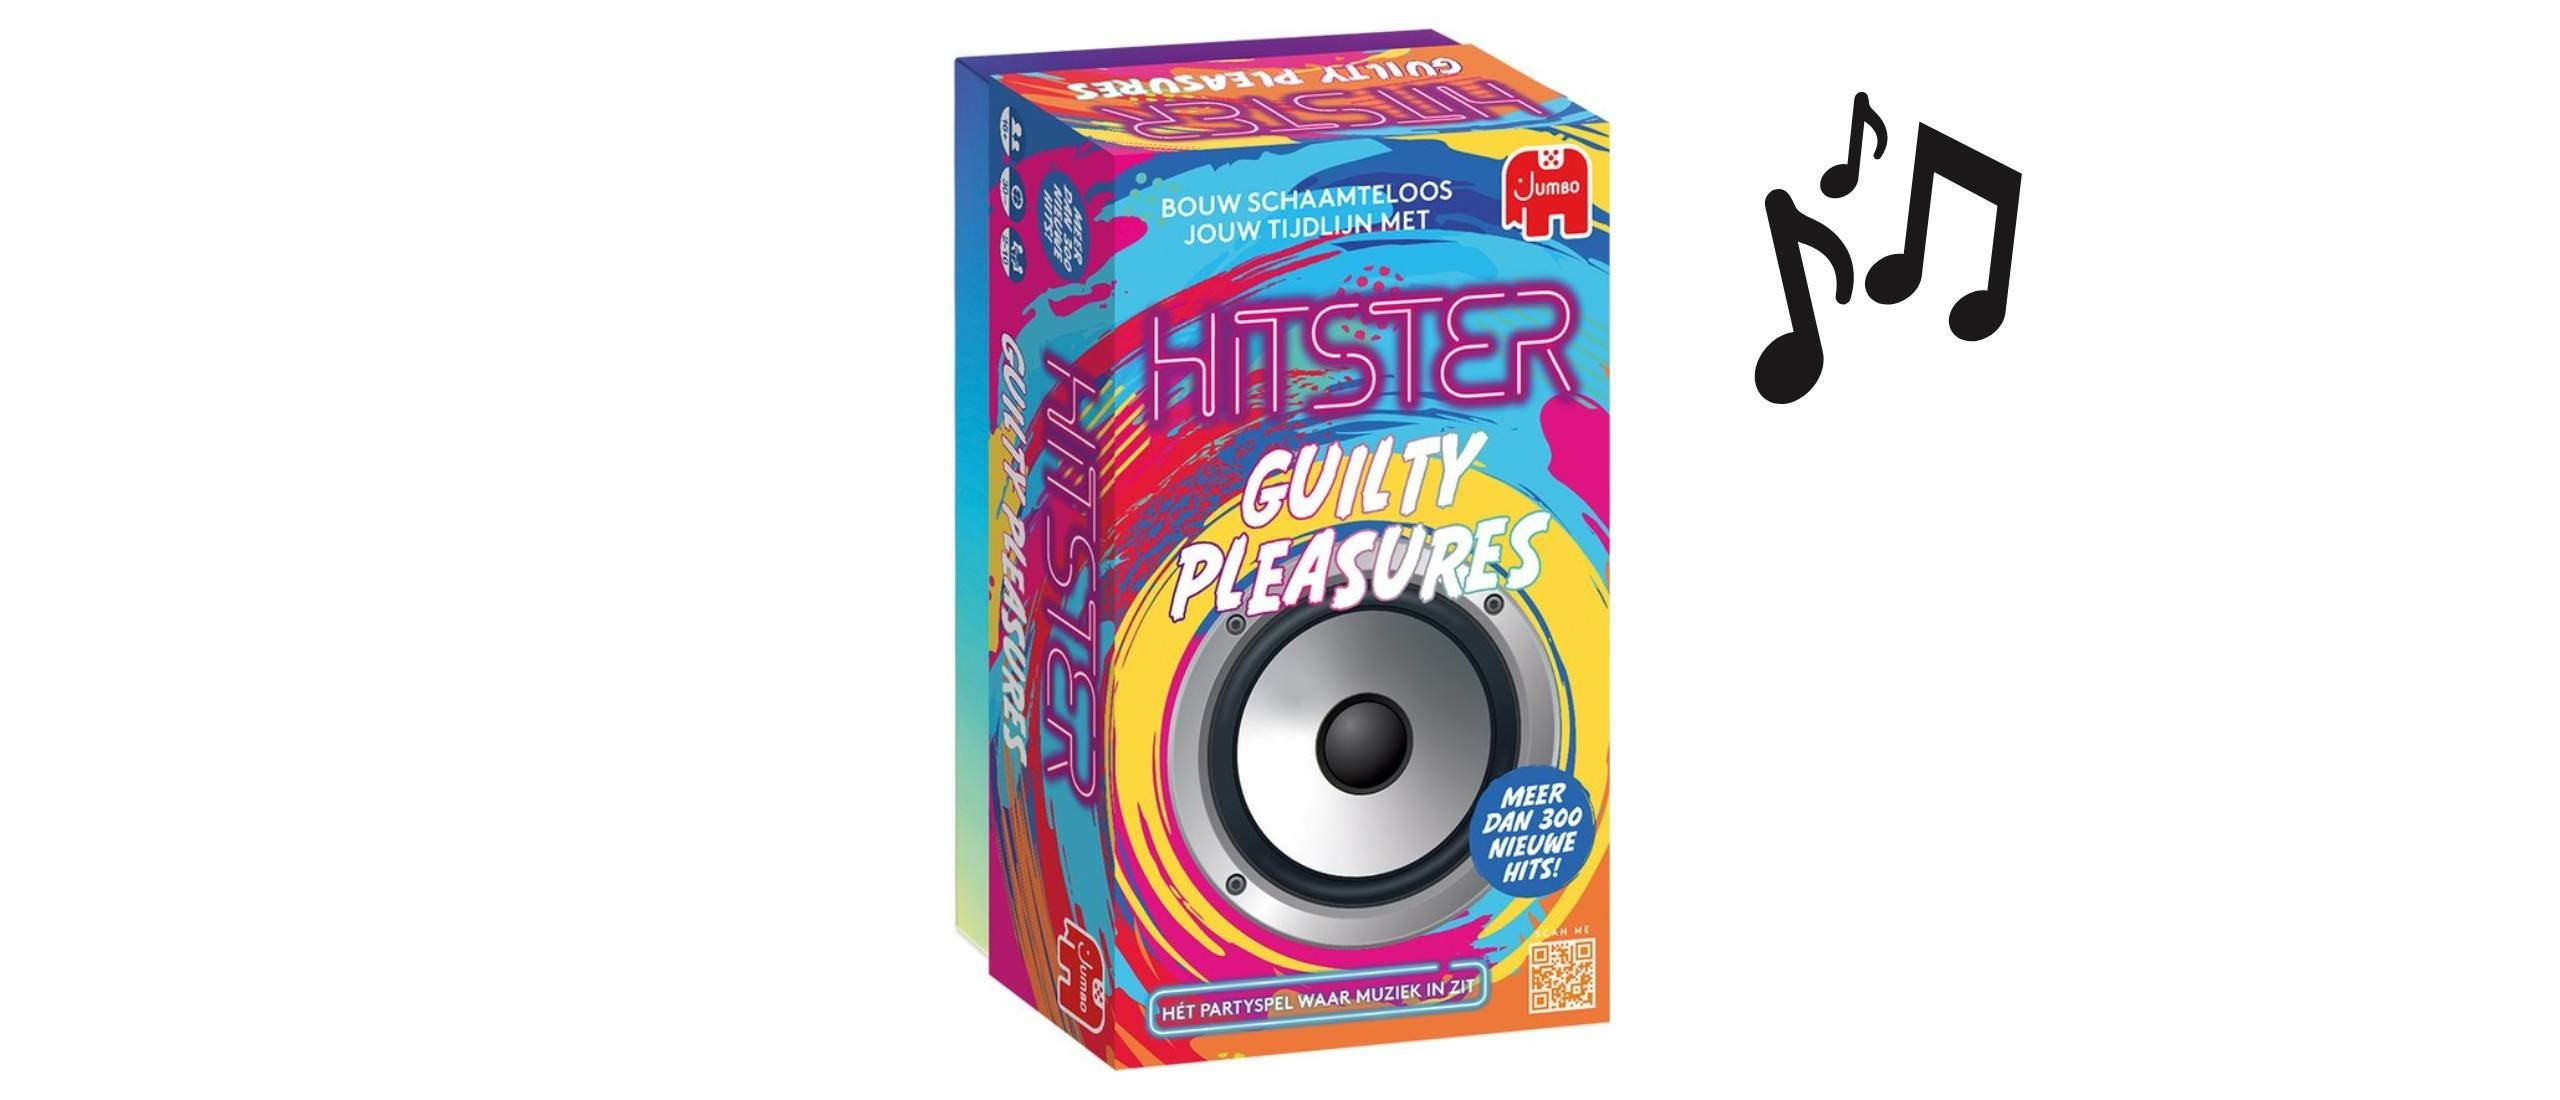 Hitster Guilty Pleasures review